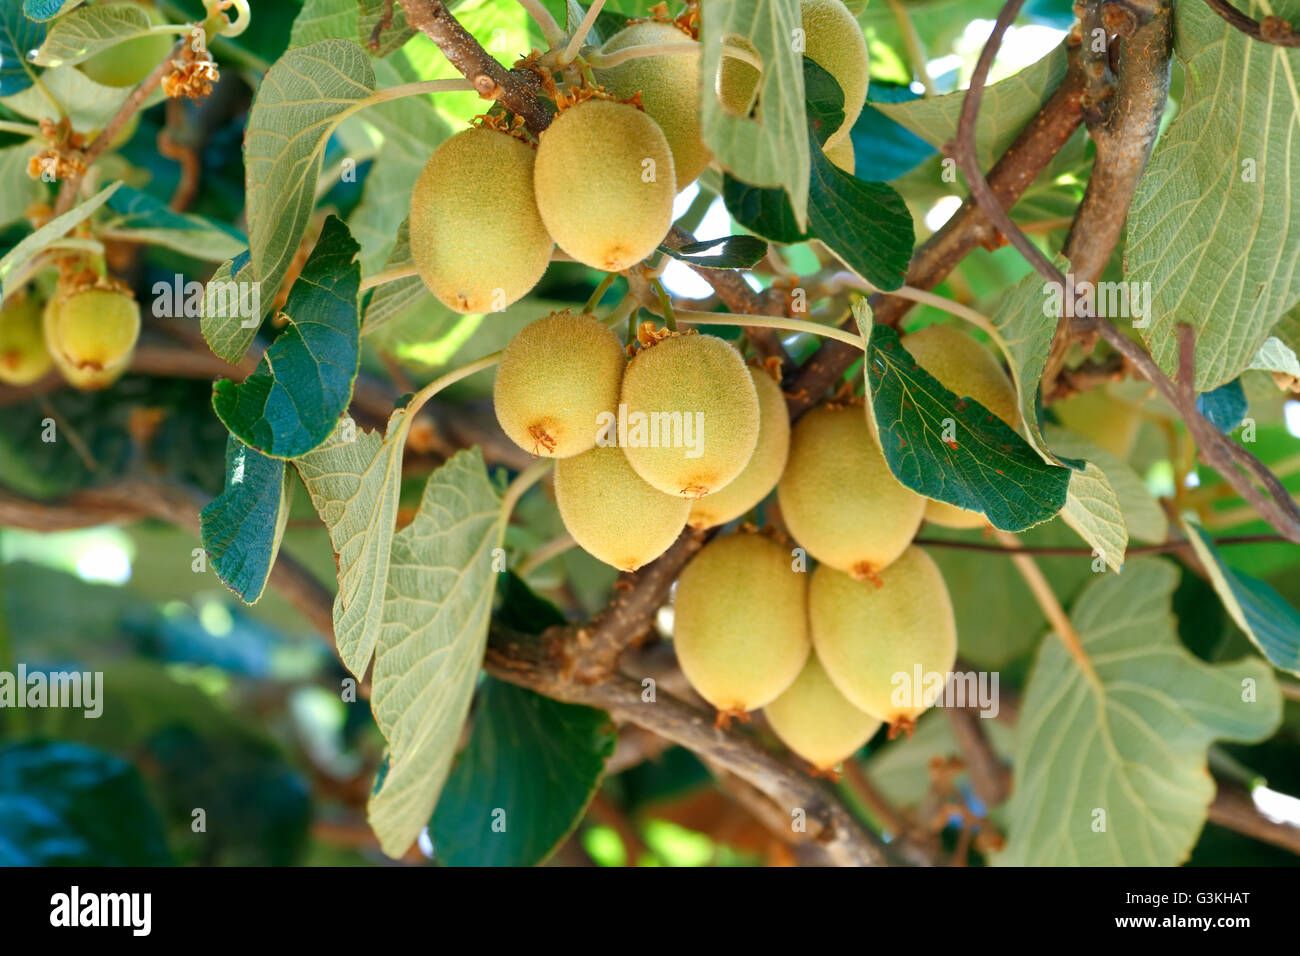 Kiwifruit /Chinese gooseberry (Actinidia sp.) on the vine tree. Kiwifruit is native to China and wide spread to the world Stock Photo